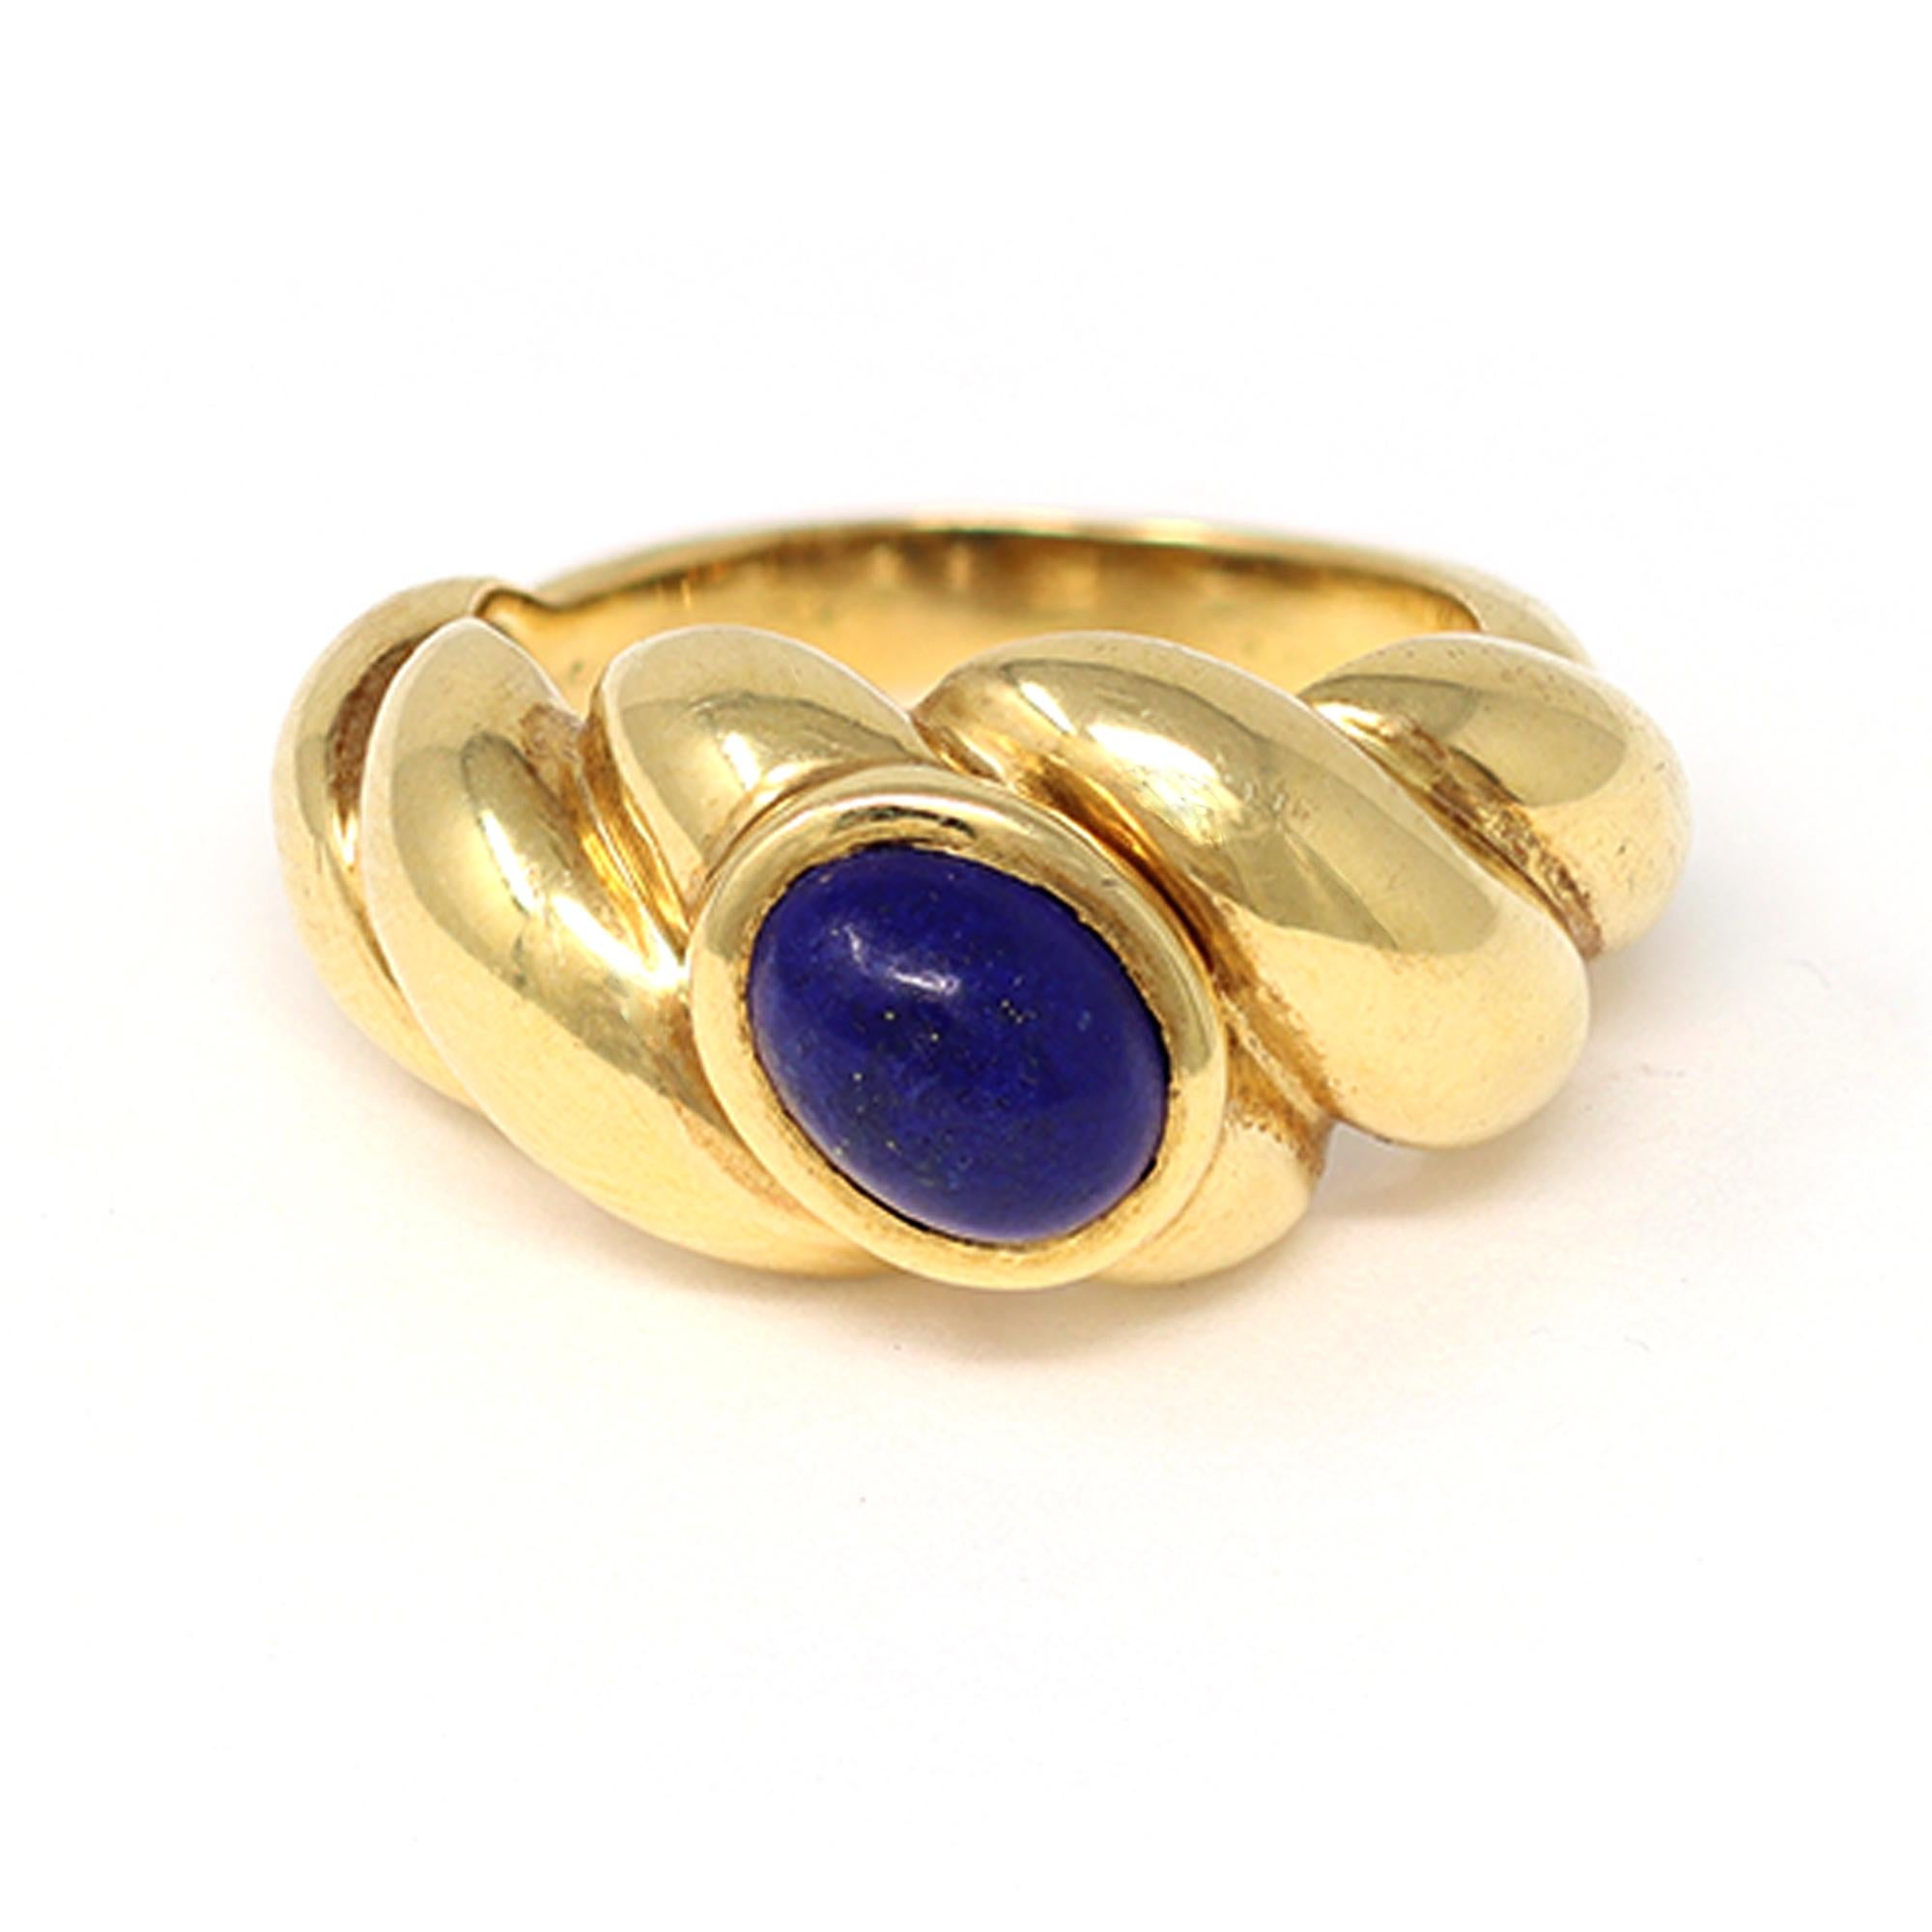 The French house of jewelry Van Cleef & Arpels signs the oval Cabochon Lapis Lazuli ring. The ring is shaped like a torsade and styled in 18 Karat yellow gold. It is signed and numbered and has a gross weight of 7.4 grams. It fits a size 4 and